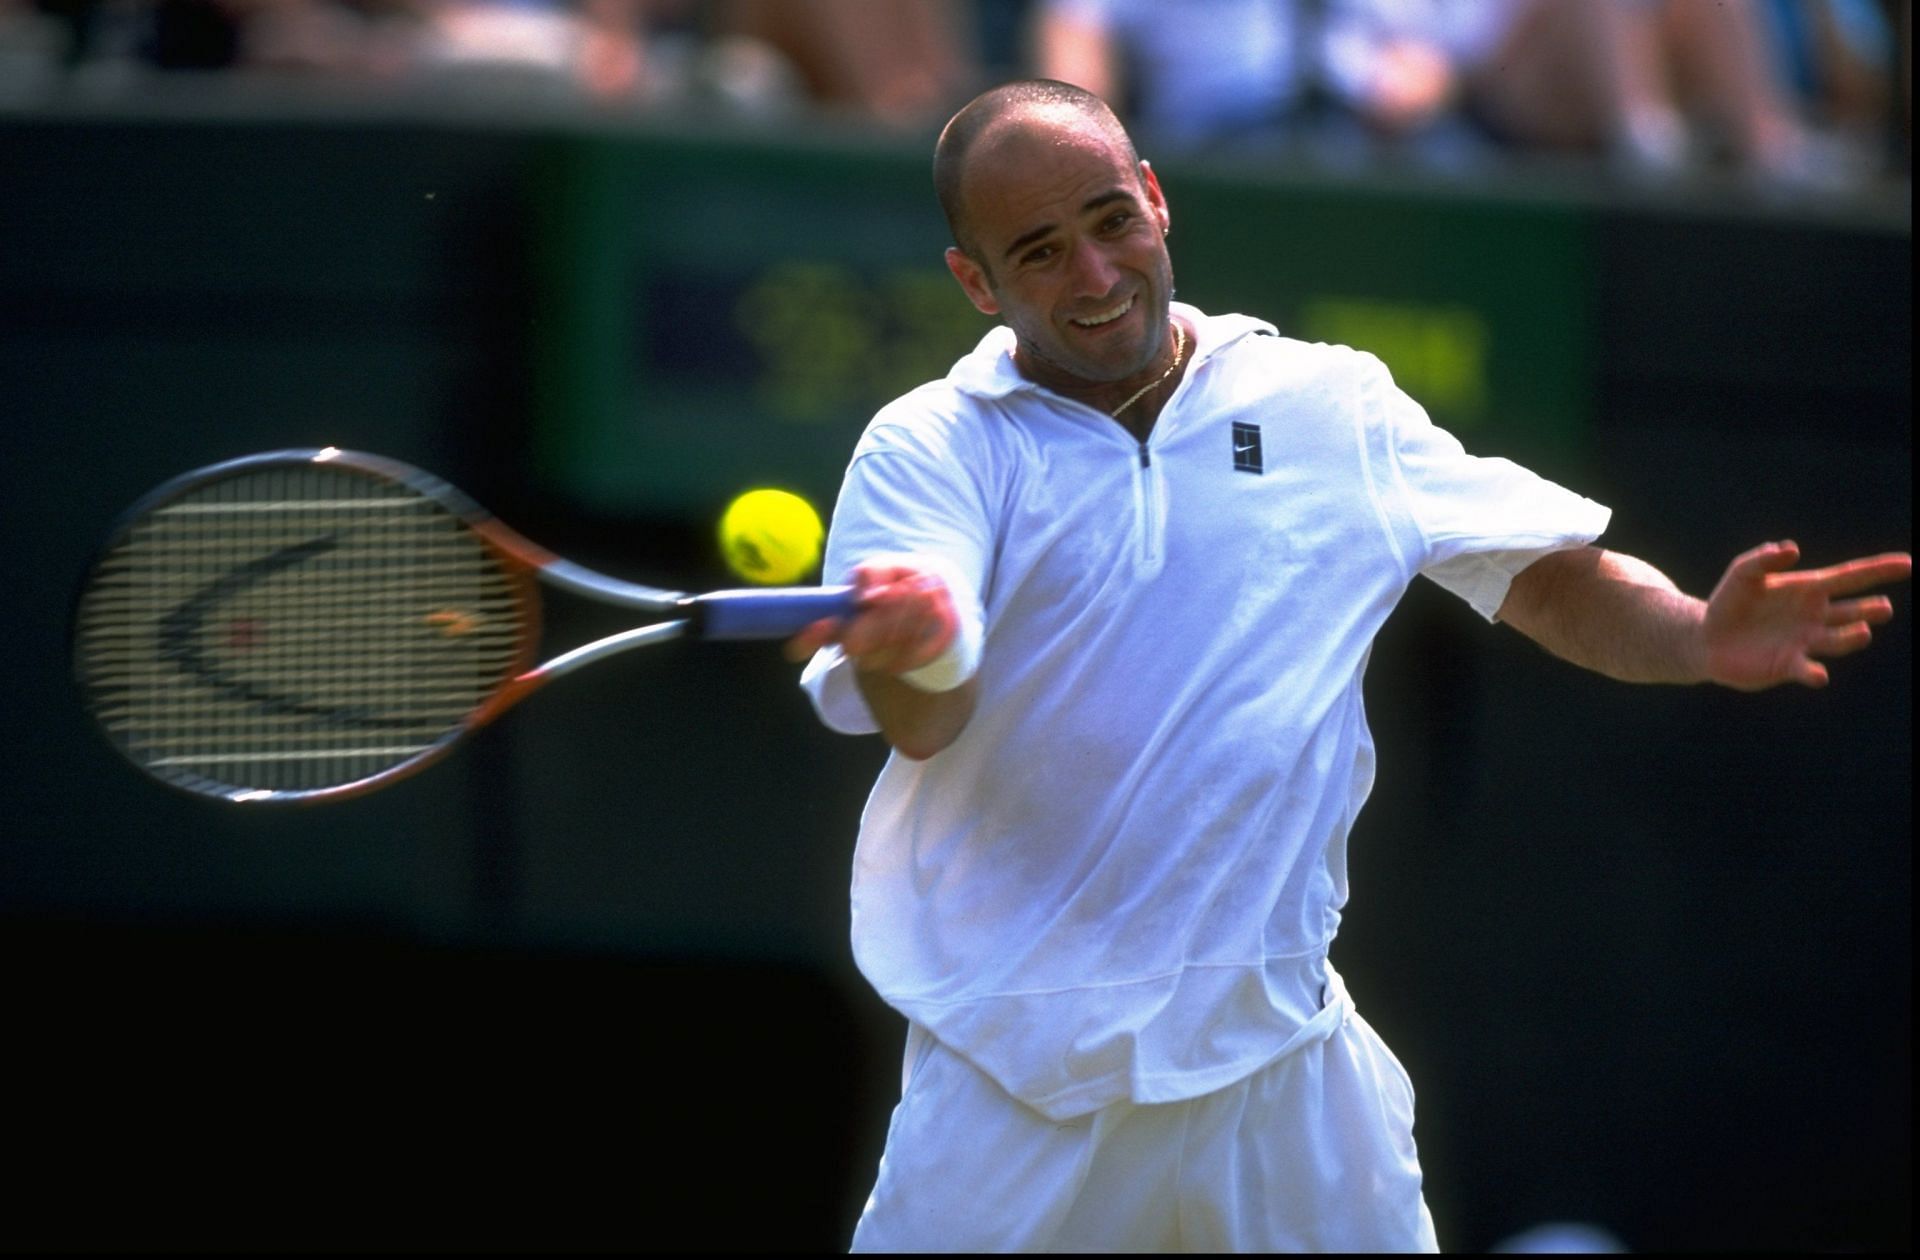 Andre Agassi in action at the 1999 Wimbledon